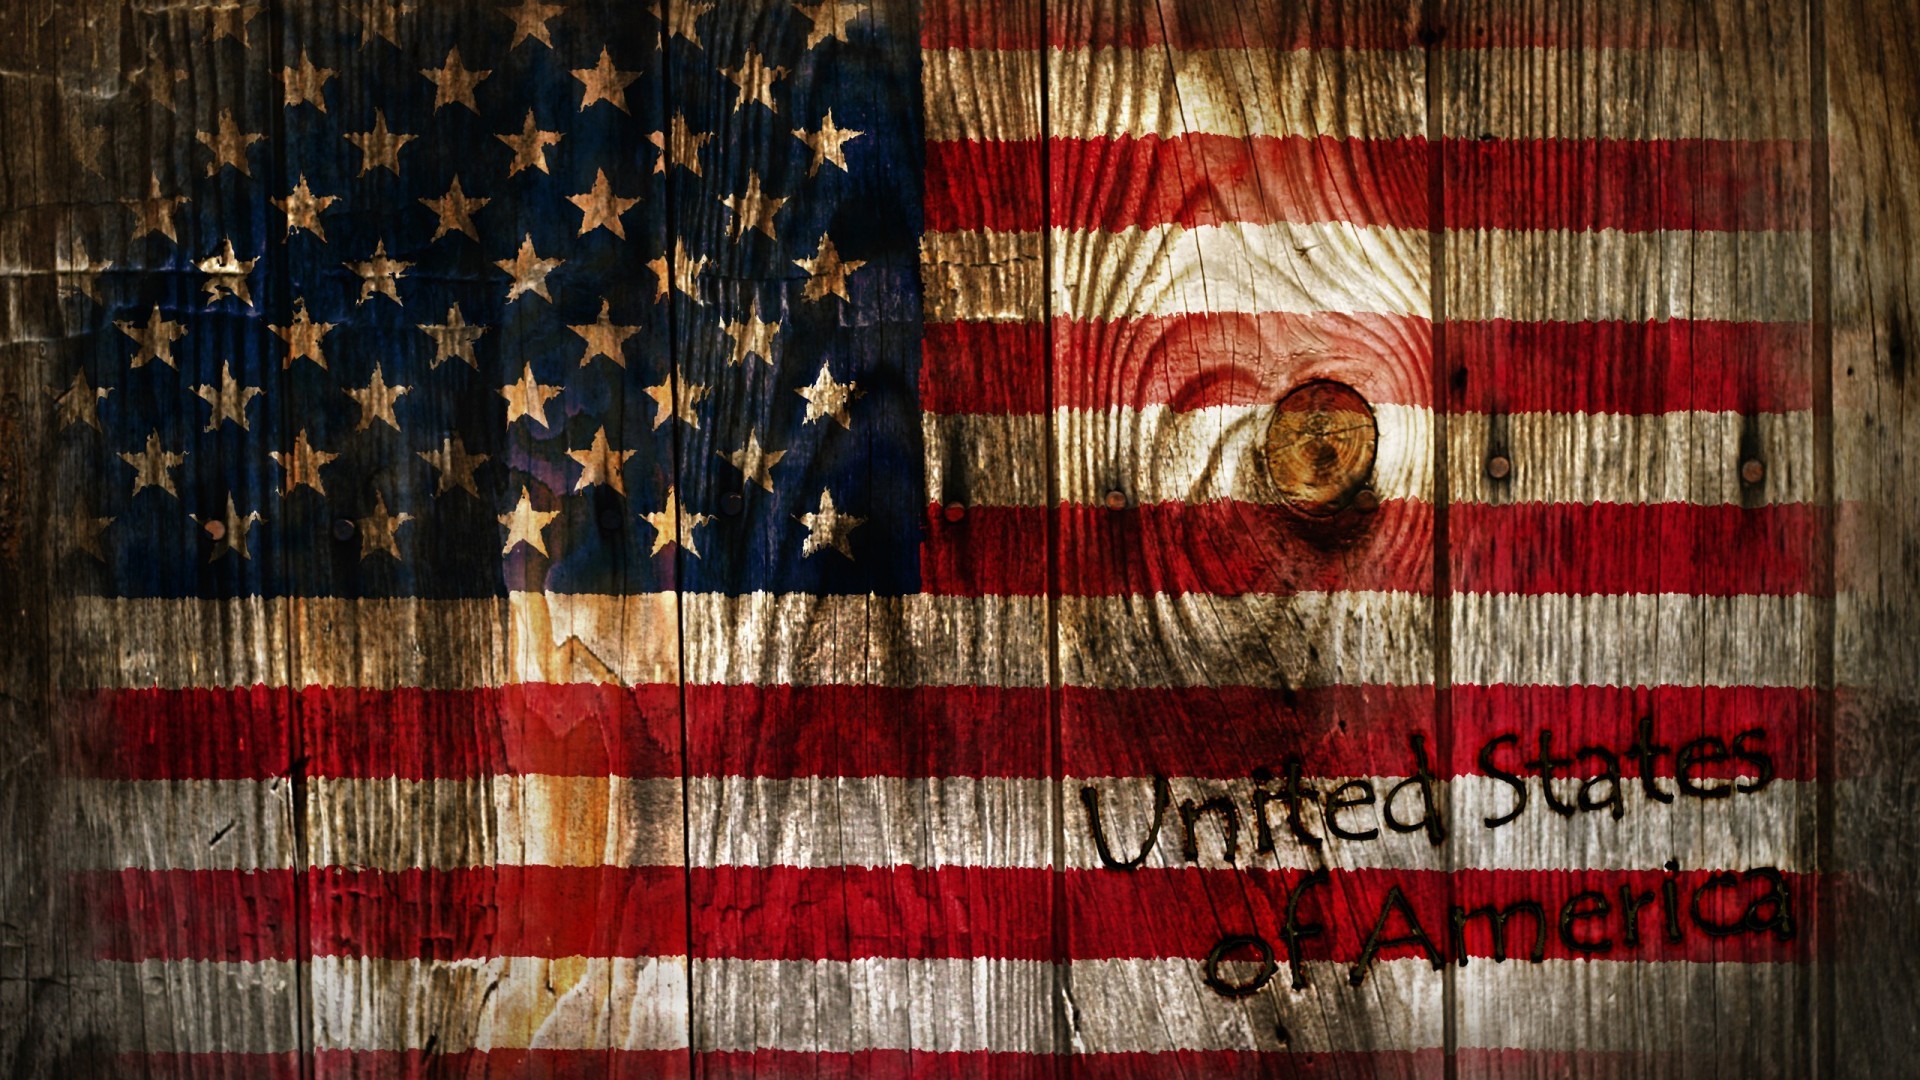 American Flag Desktop Wallpaper with high-resolution 1920x1080 pixel. You can use this wallpaper for your Windows and Mac OS computers as well as your Android and iPhone smartphones